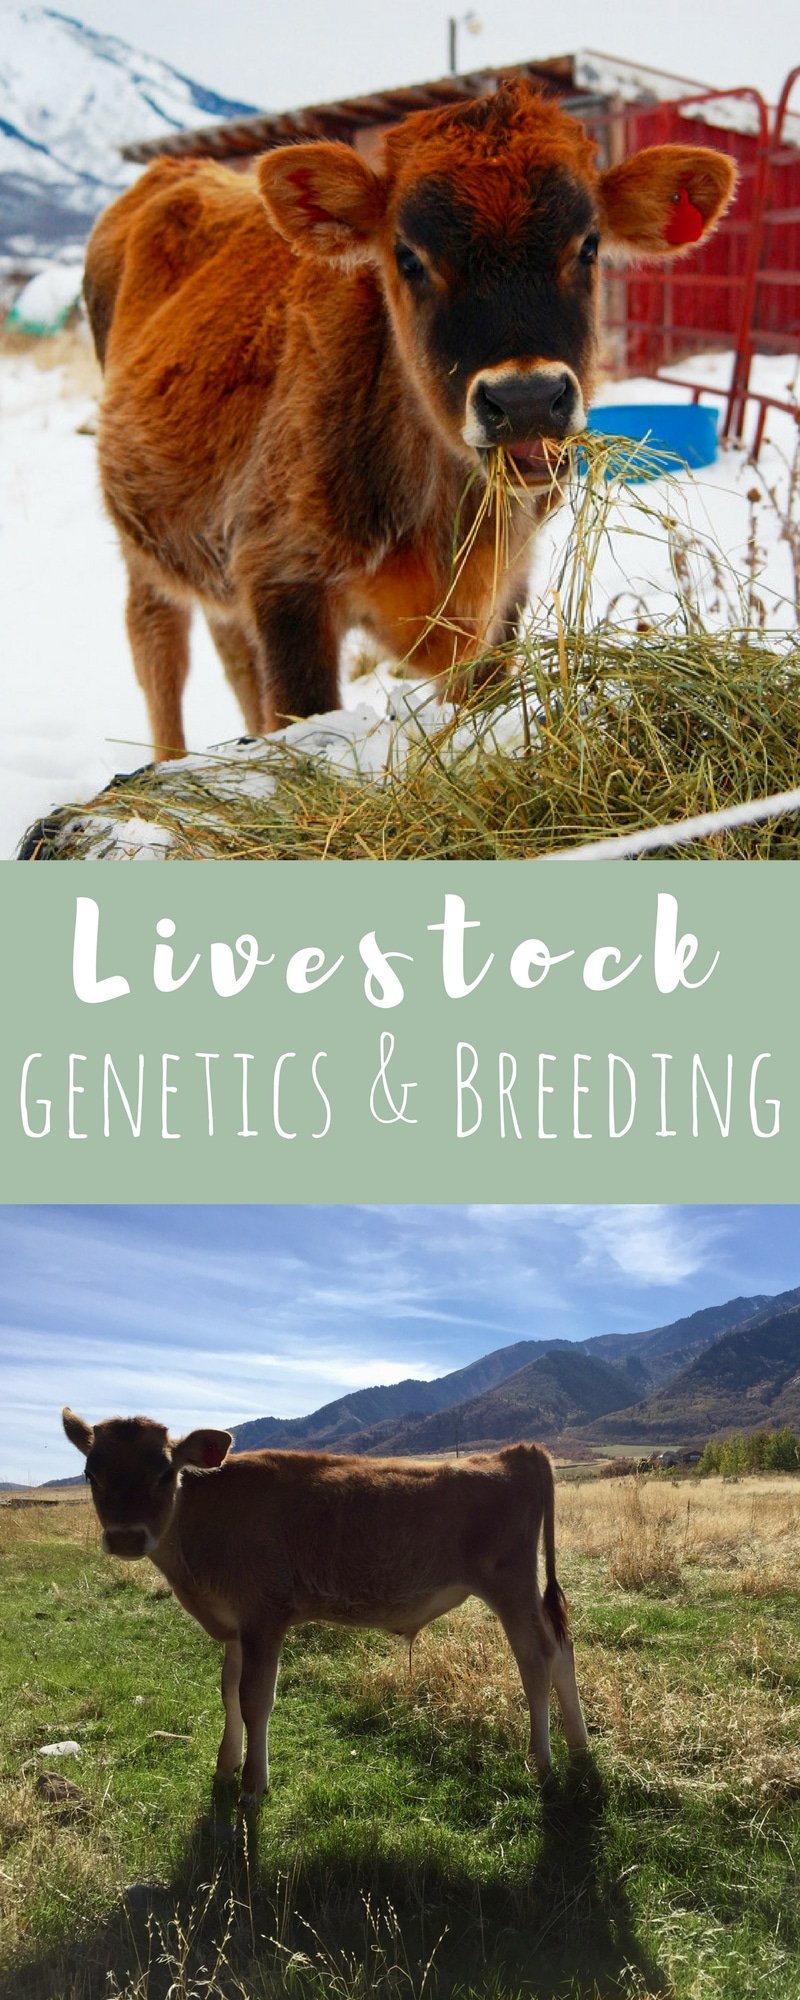 Check out this post on animal genetics and breeding for livestock to get valuable information you'll need when considering breeding livestock on your hobby farm or homestead. Breeding livestock correctly is essential to having healthy, productive animals!
